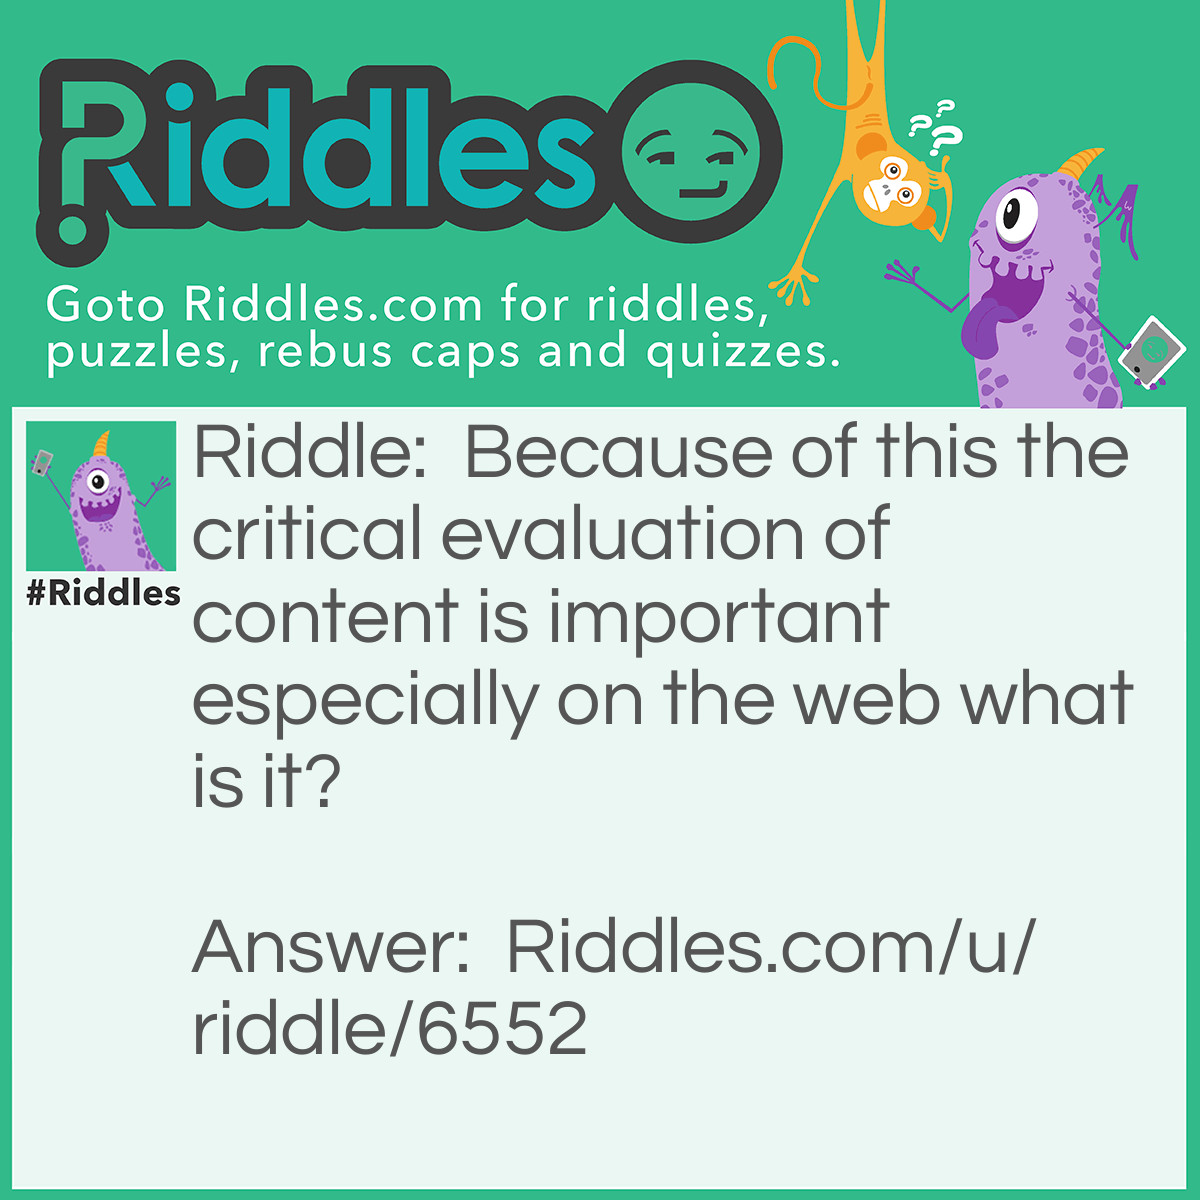 Riddle: Because of this the critical evaluation of content is important especially on the web what is it? Answer: Anyone can publish on the Web. There is no guarantee that what you’re reading is objective or accurate